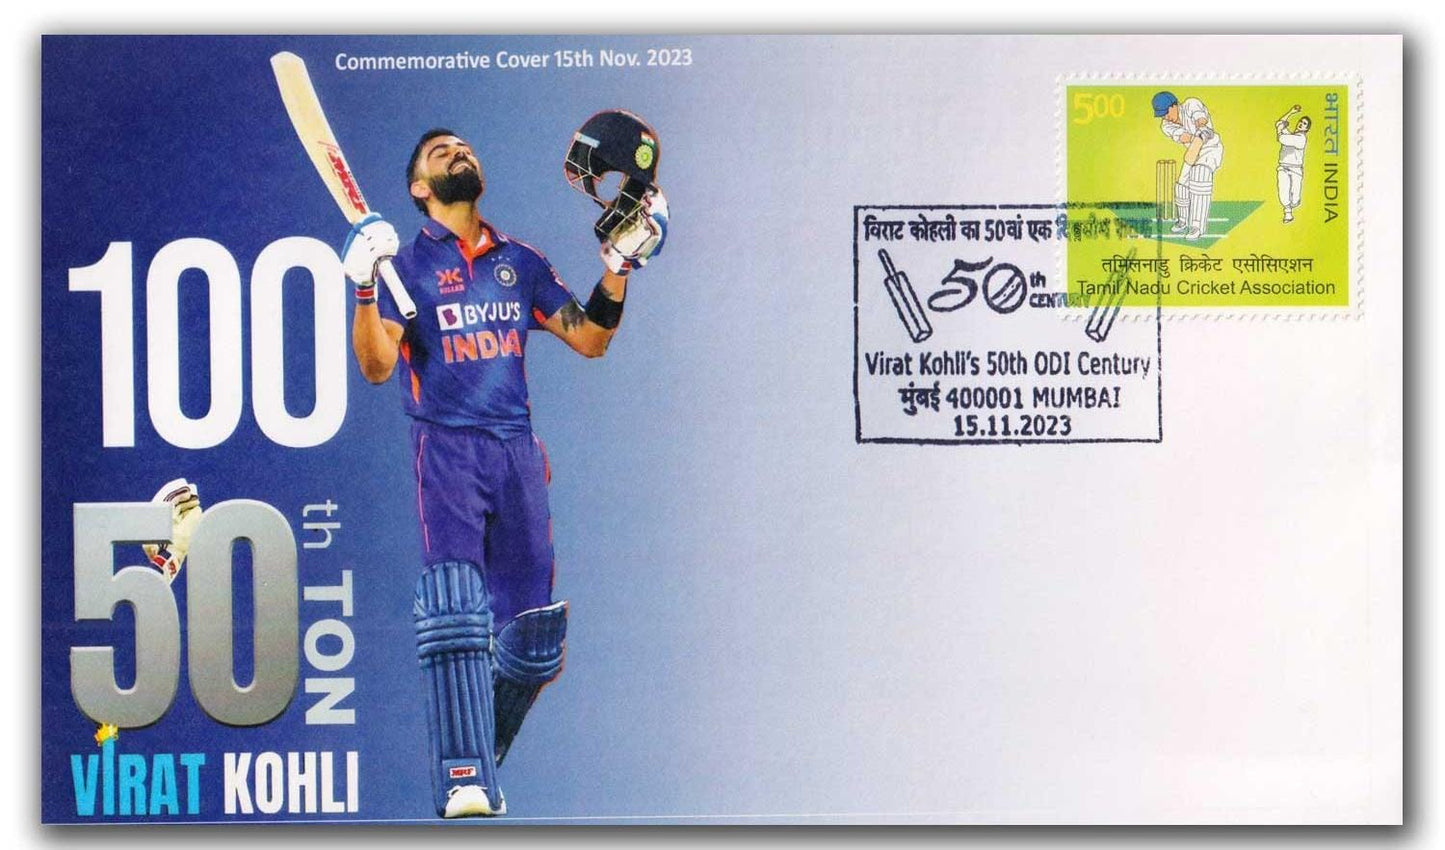 Virat Kohli's 50th century - special one day Cancellation issued on 15.11.23 from Mumbai